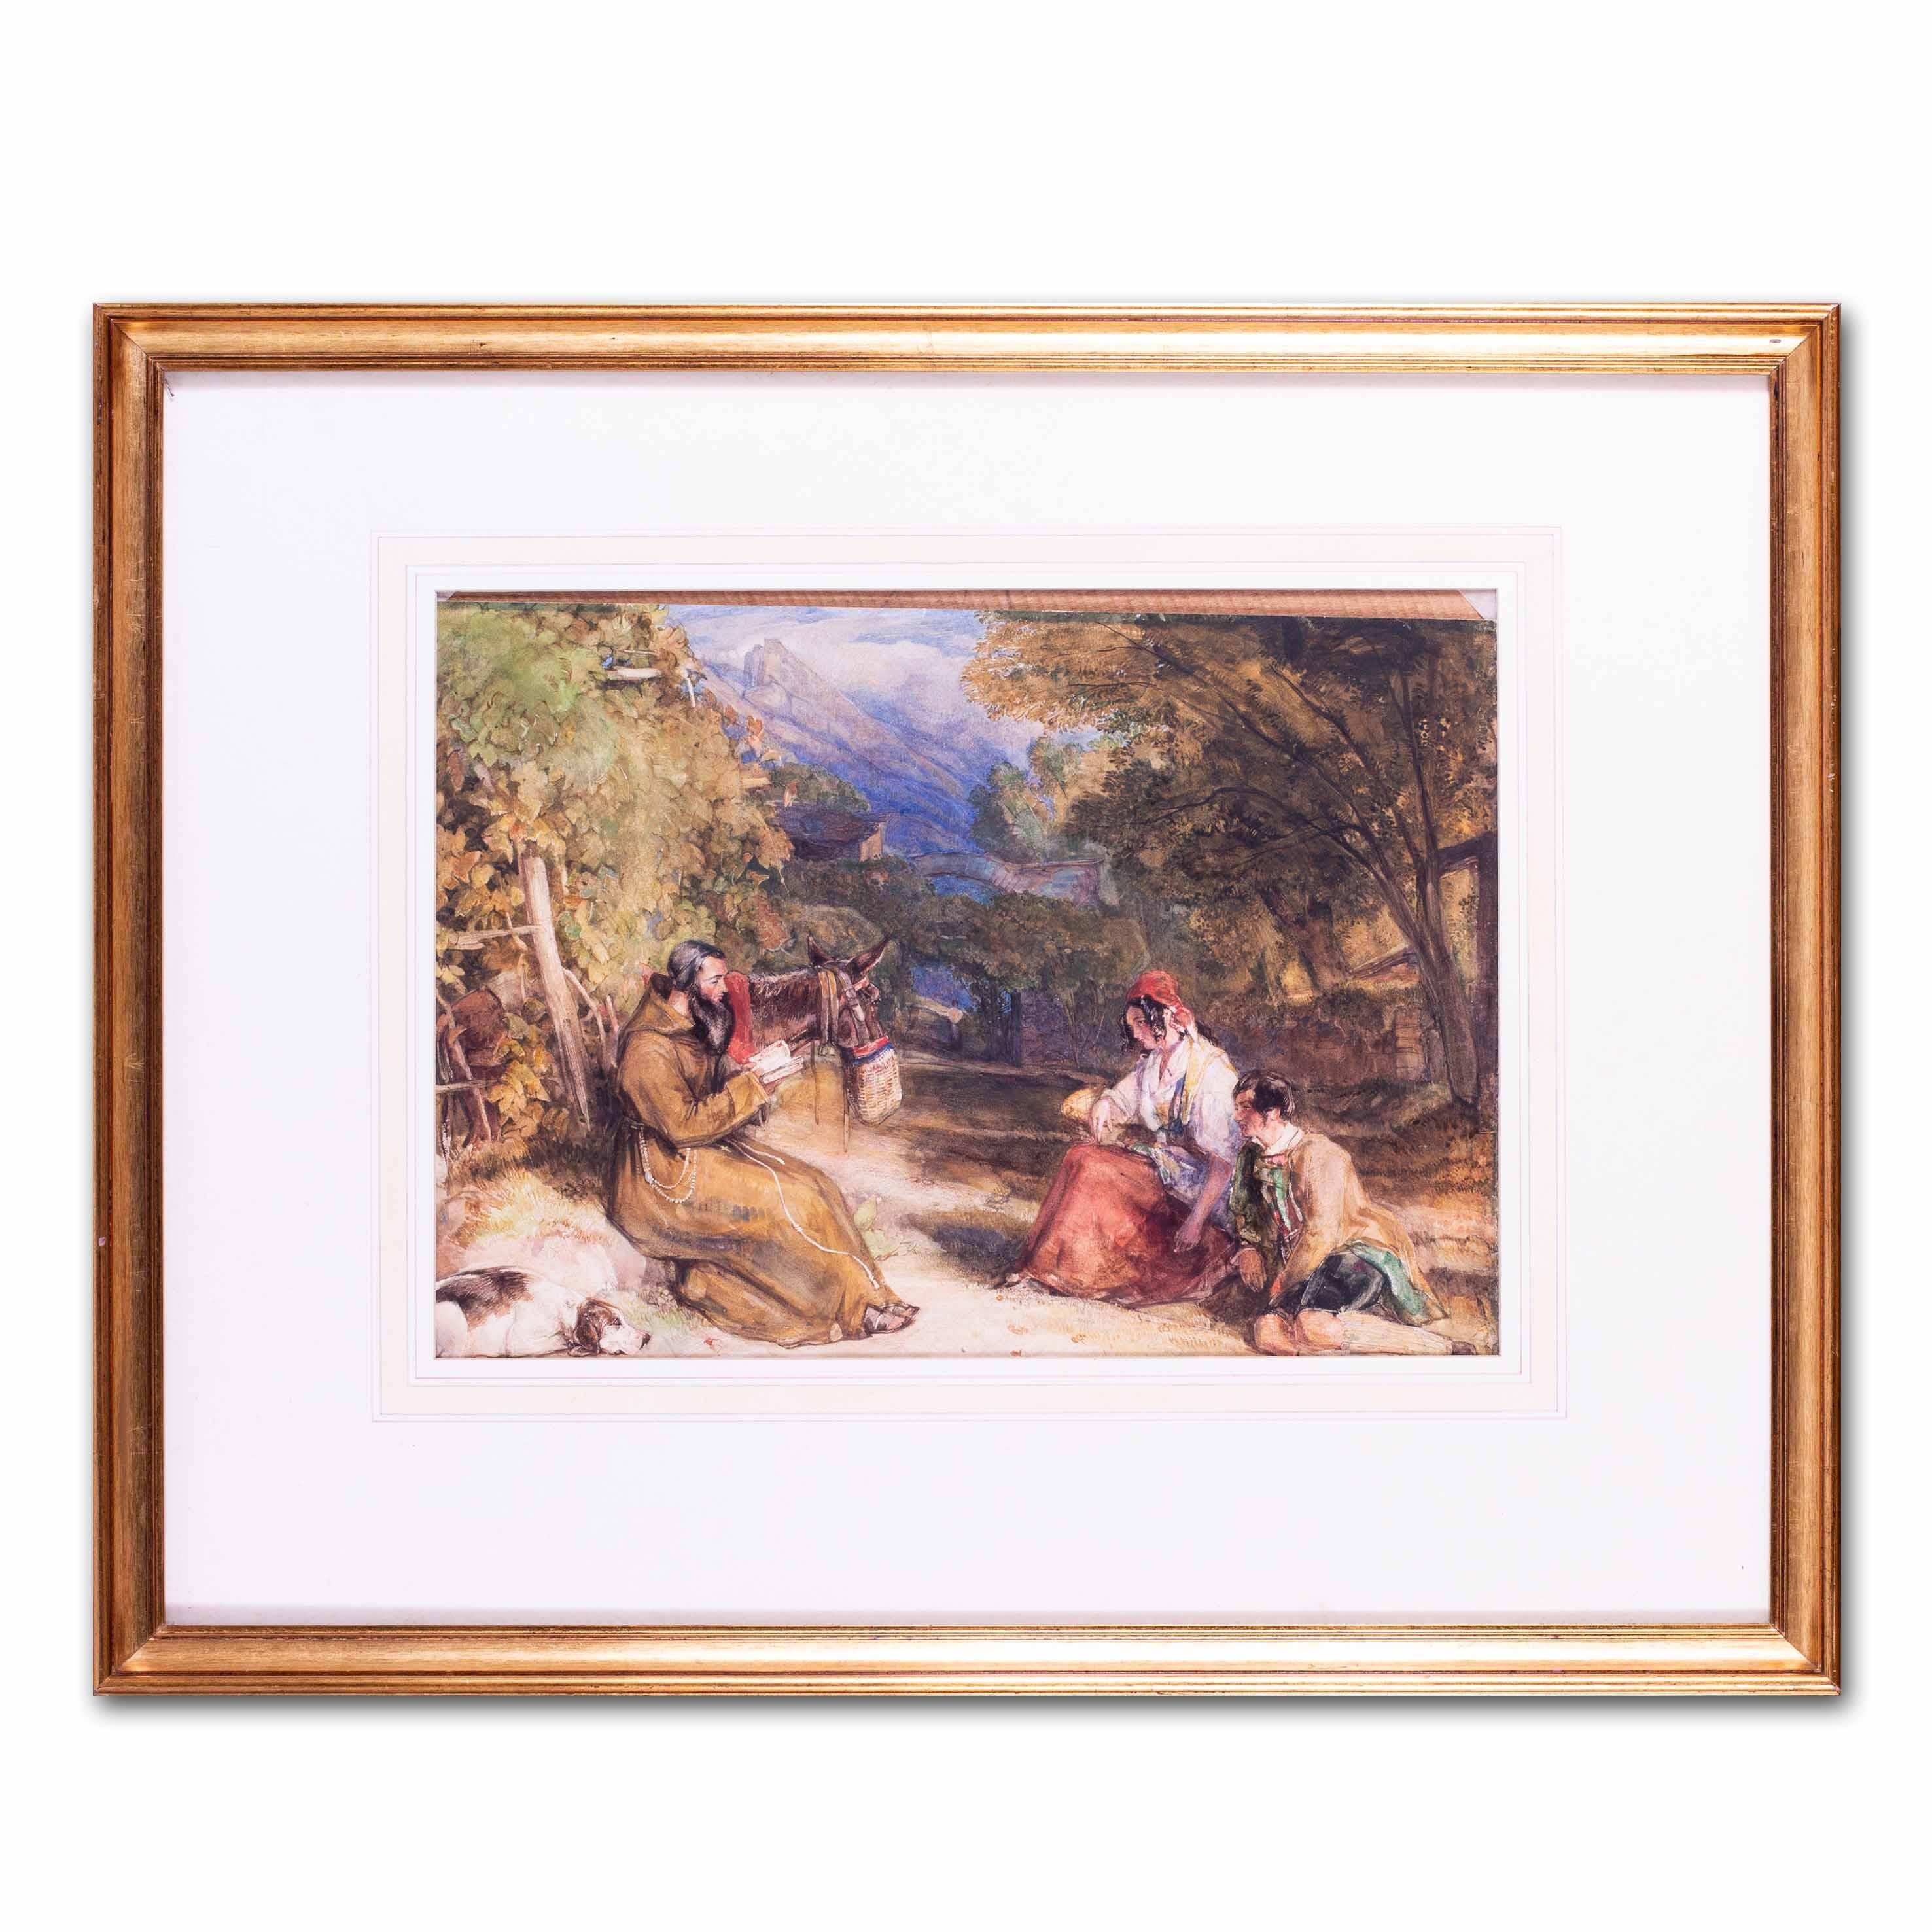 British, 19th Century watercolour by John Frederick Lewis, 'Receiving a blessing 4